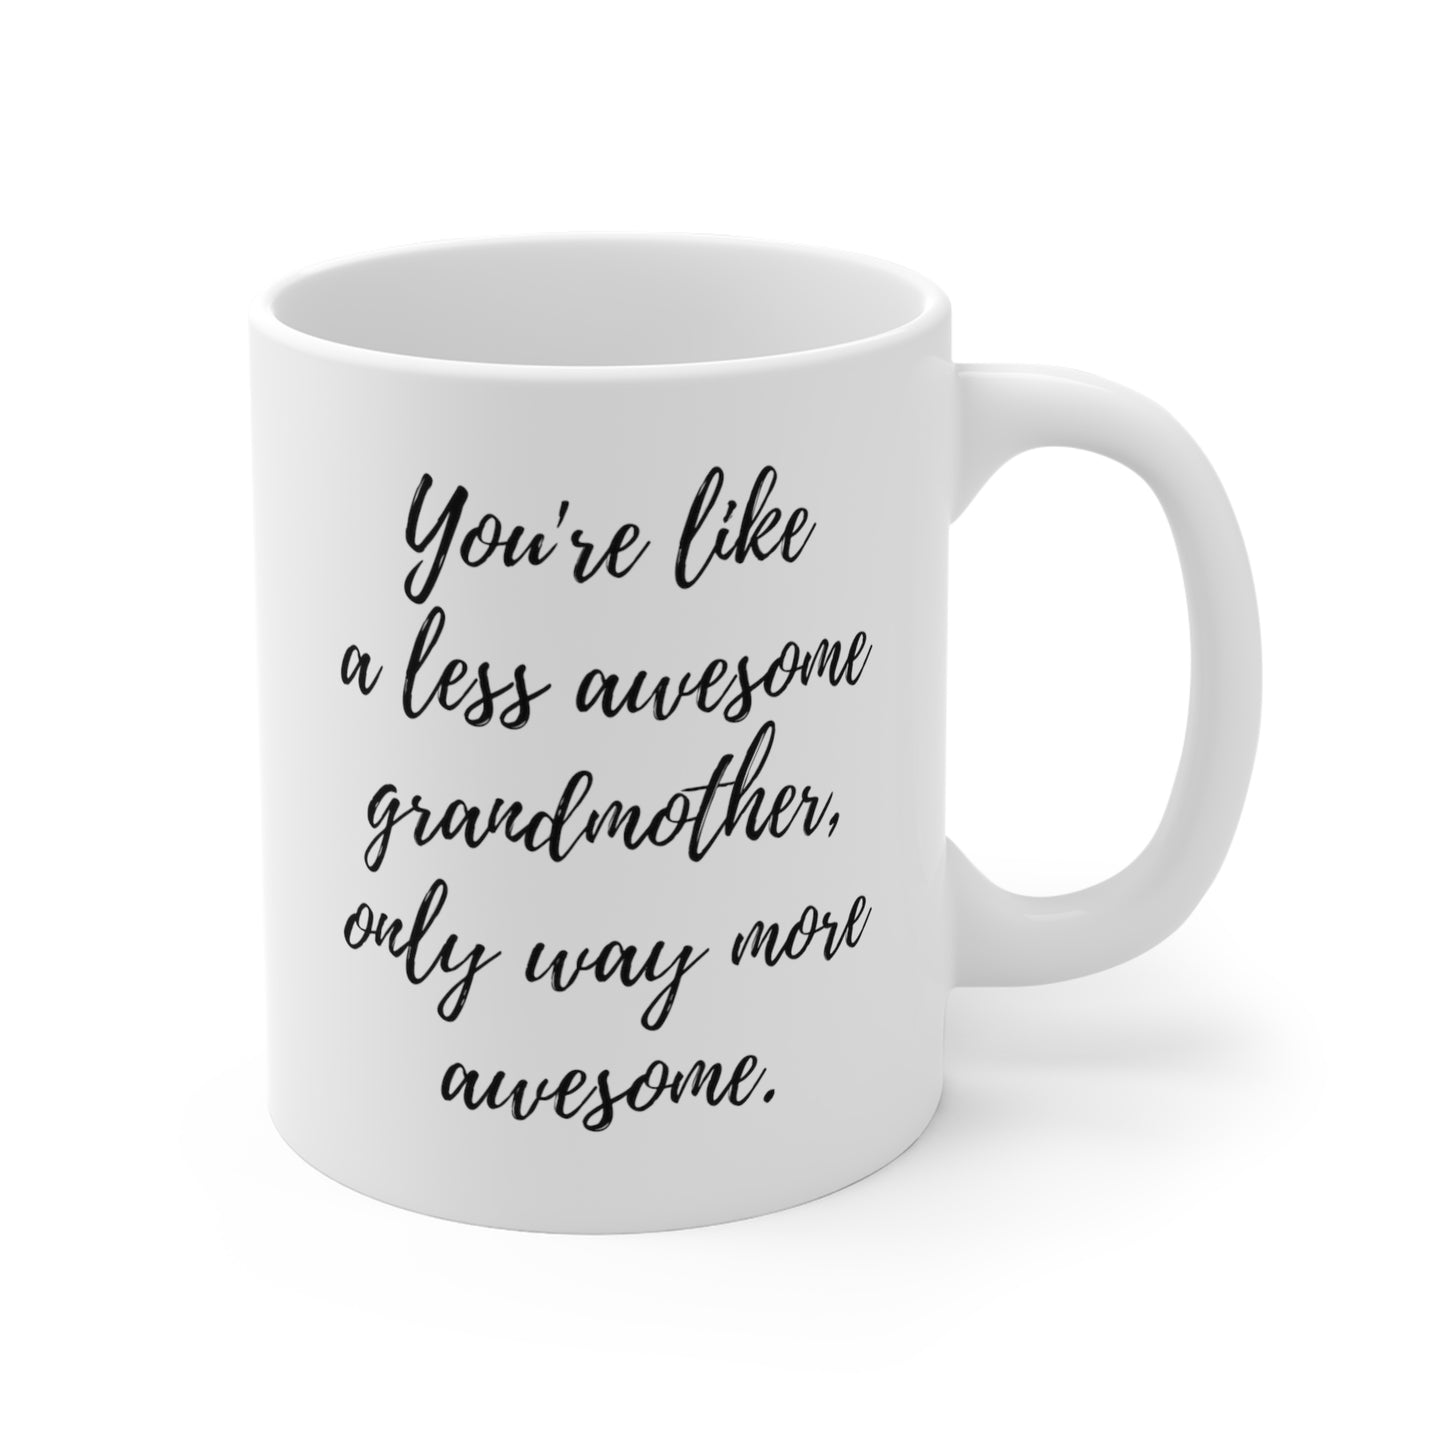 You're Like A Less Awesome Grandmother, Only Way More Awesome | Funny, Snarky Gift | White Ceramic Mug, Script Font